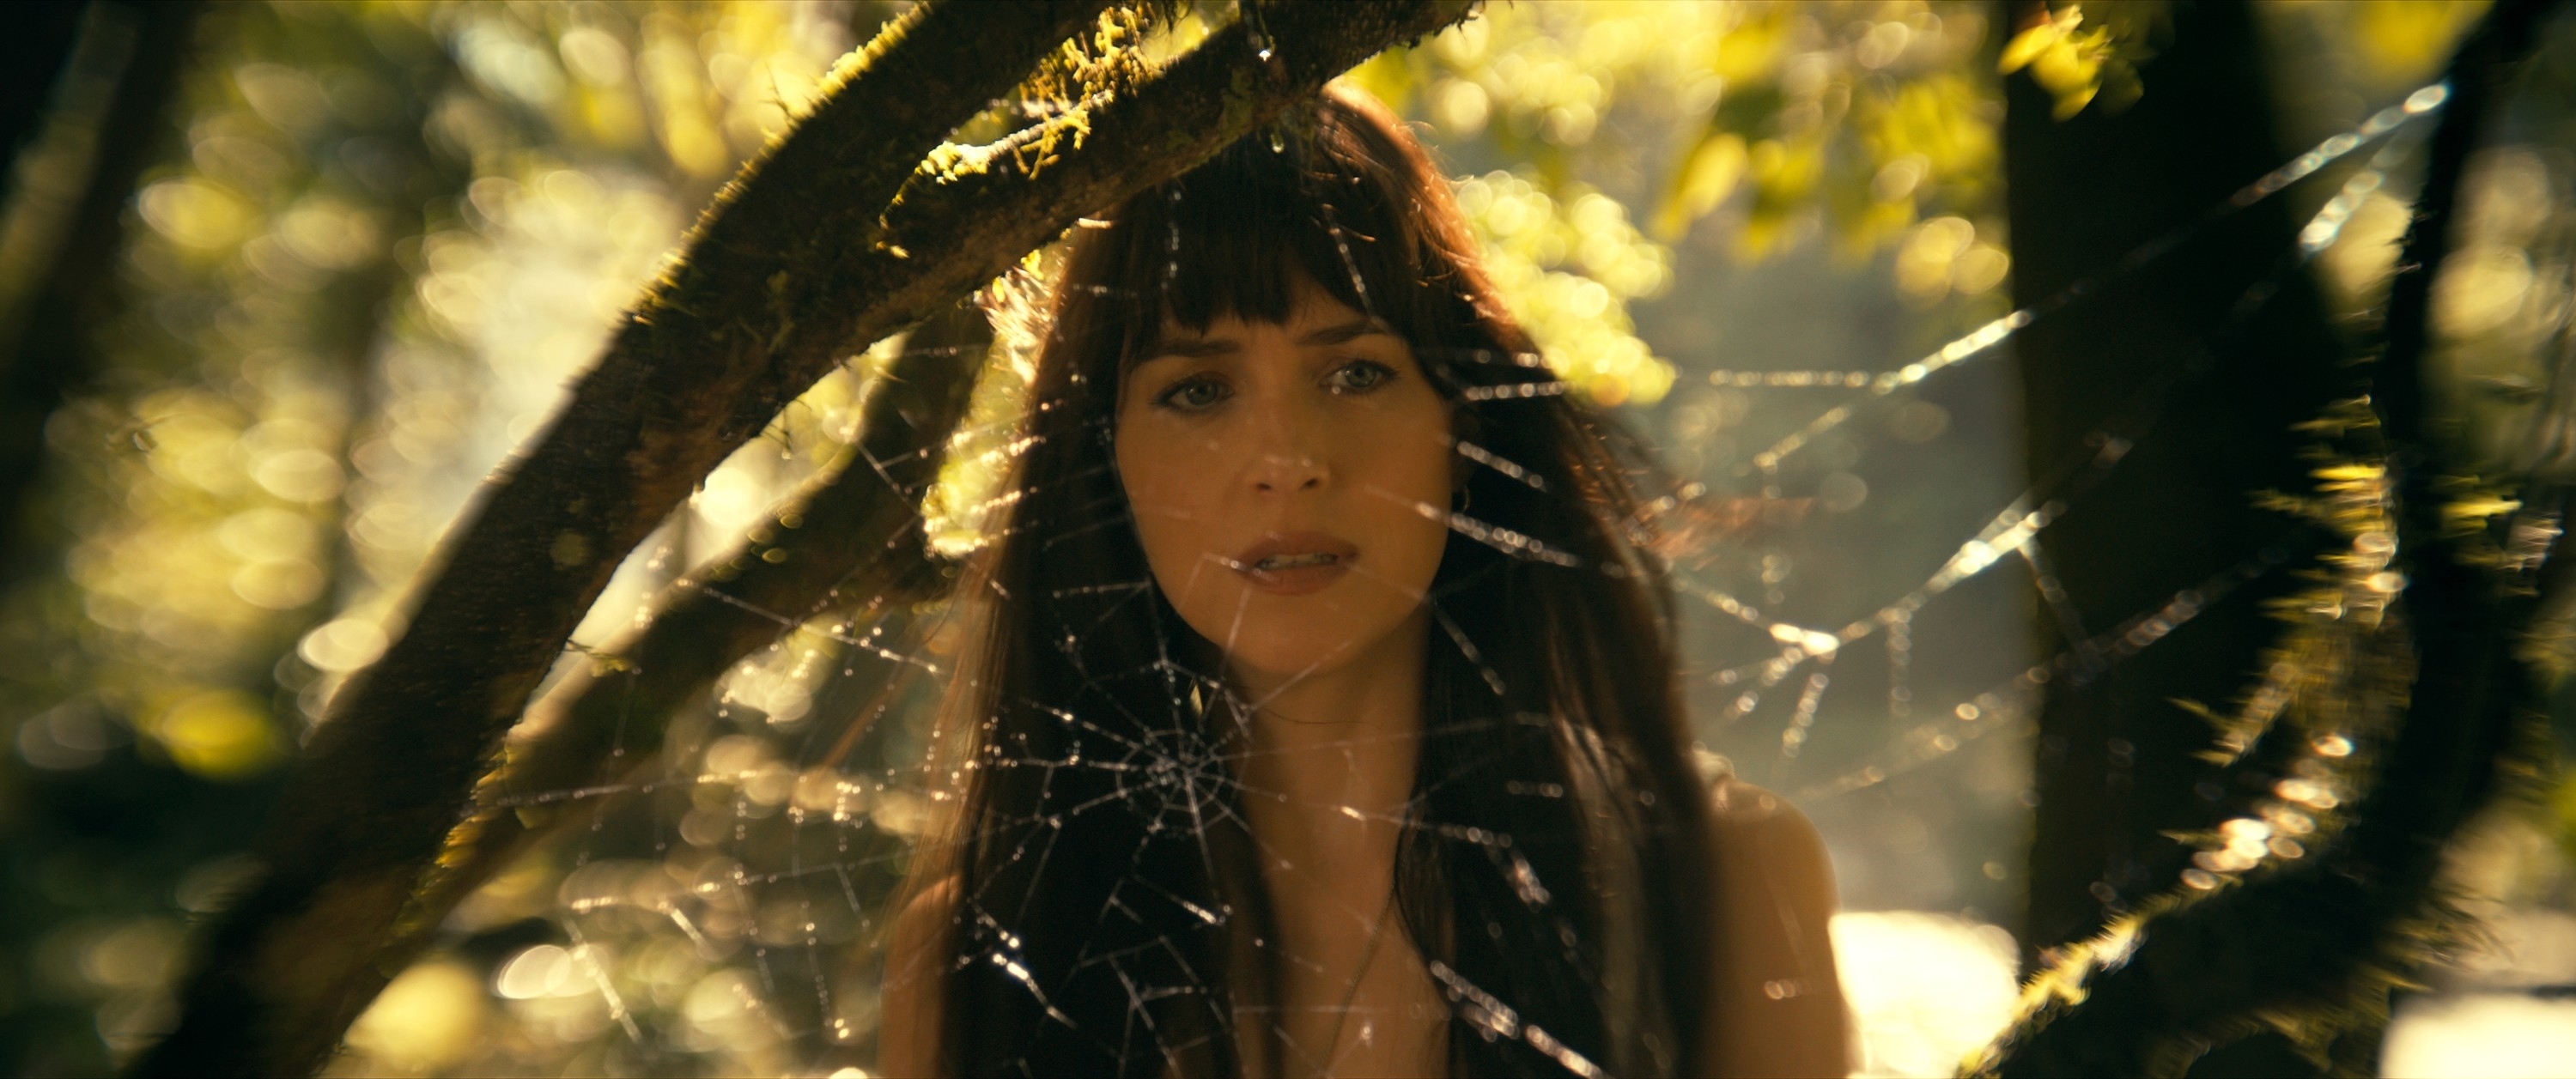 A woman with long hair looks through a spiderweb hanging between tree branches in a forest